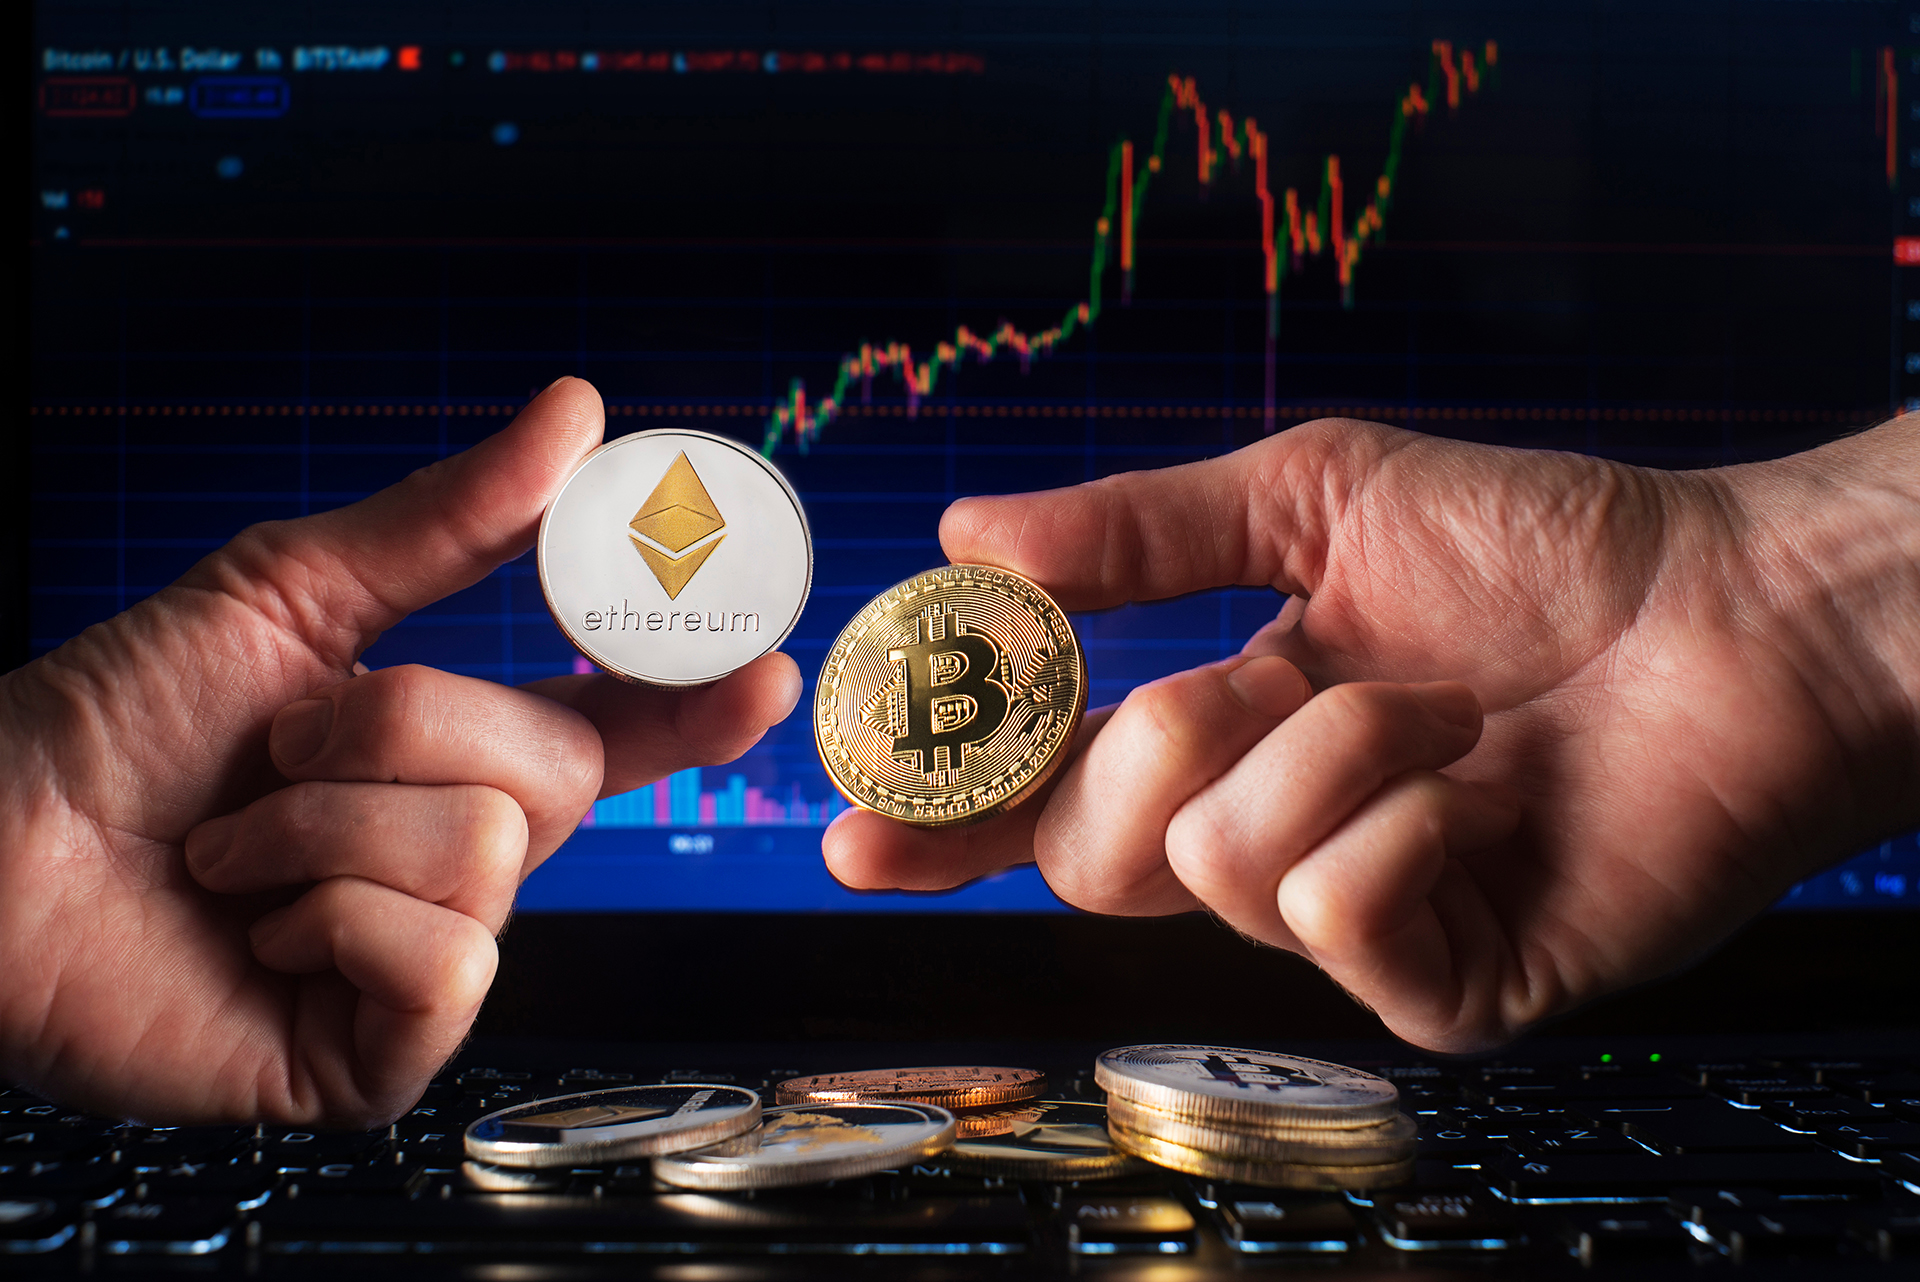 Crypto Market Selloff: Bitcoin (BTC), ETH, SOL, XRP, SHIB prices fell amid fresh signs of weakness, with a crash likely this week as post-halving consolidation continues.